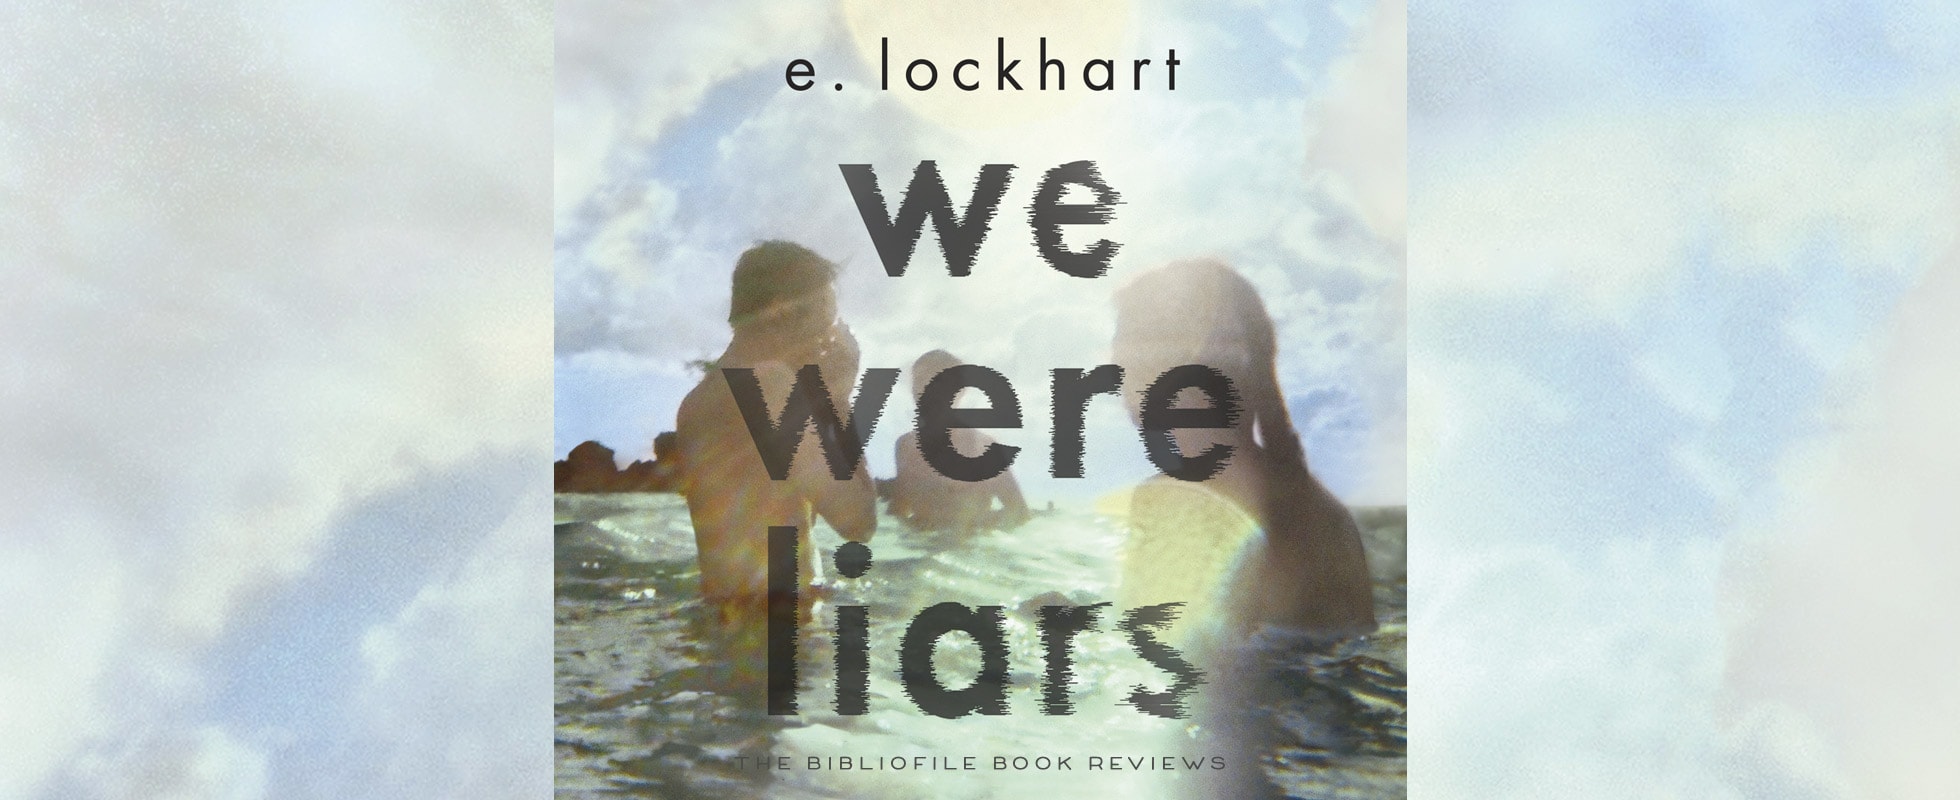 we were liars by e. lockhart book review summary recap synopsis